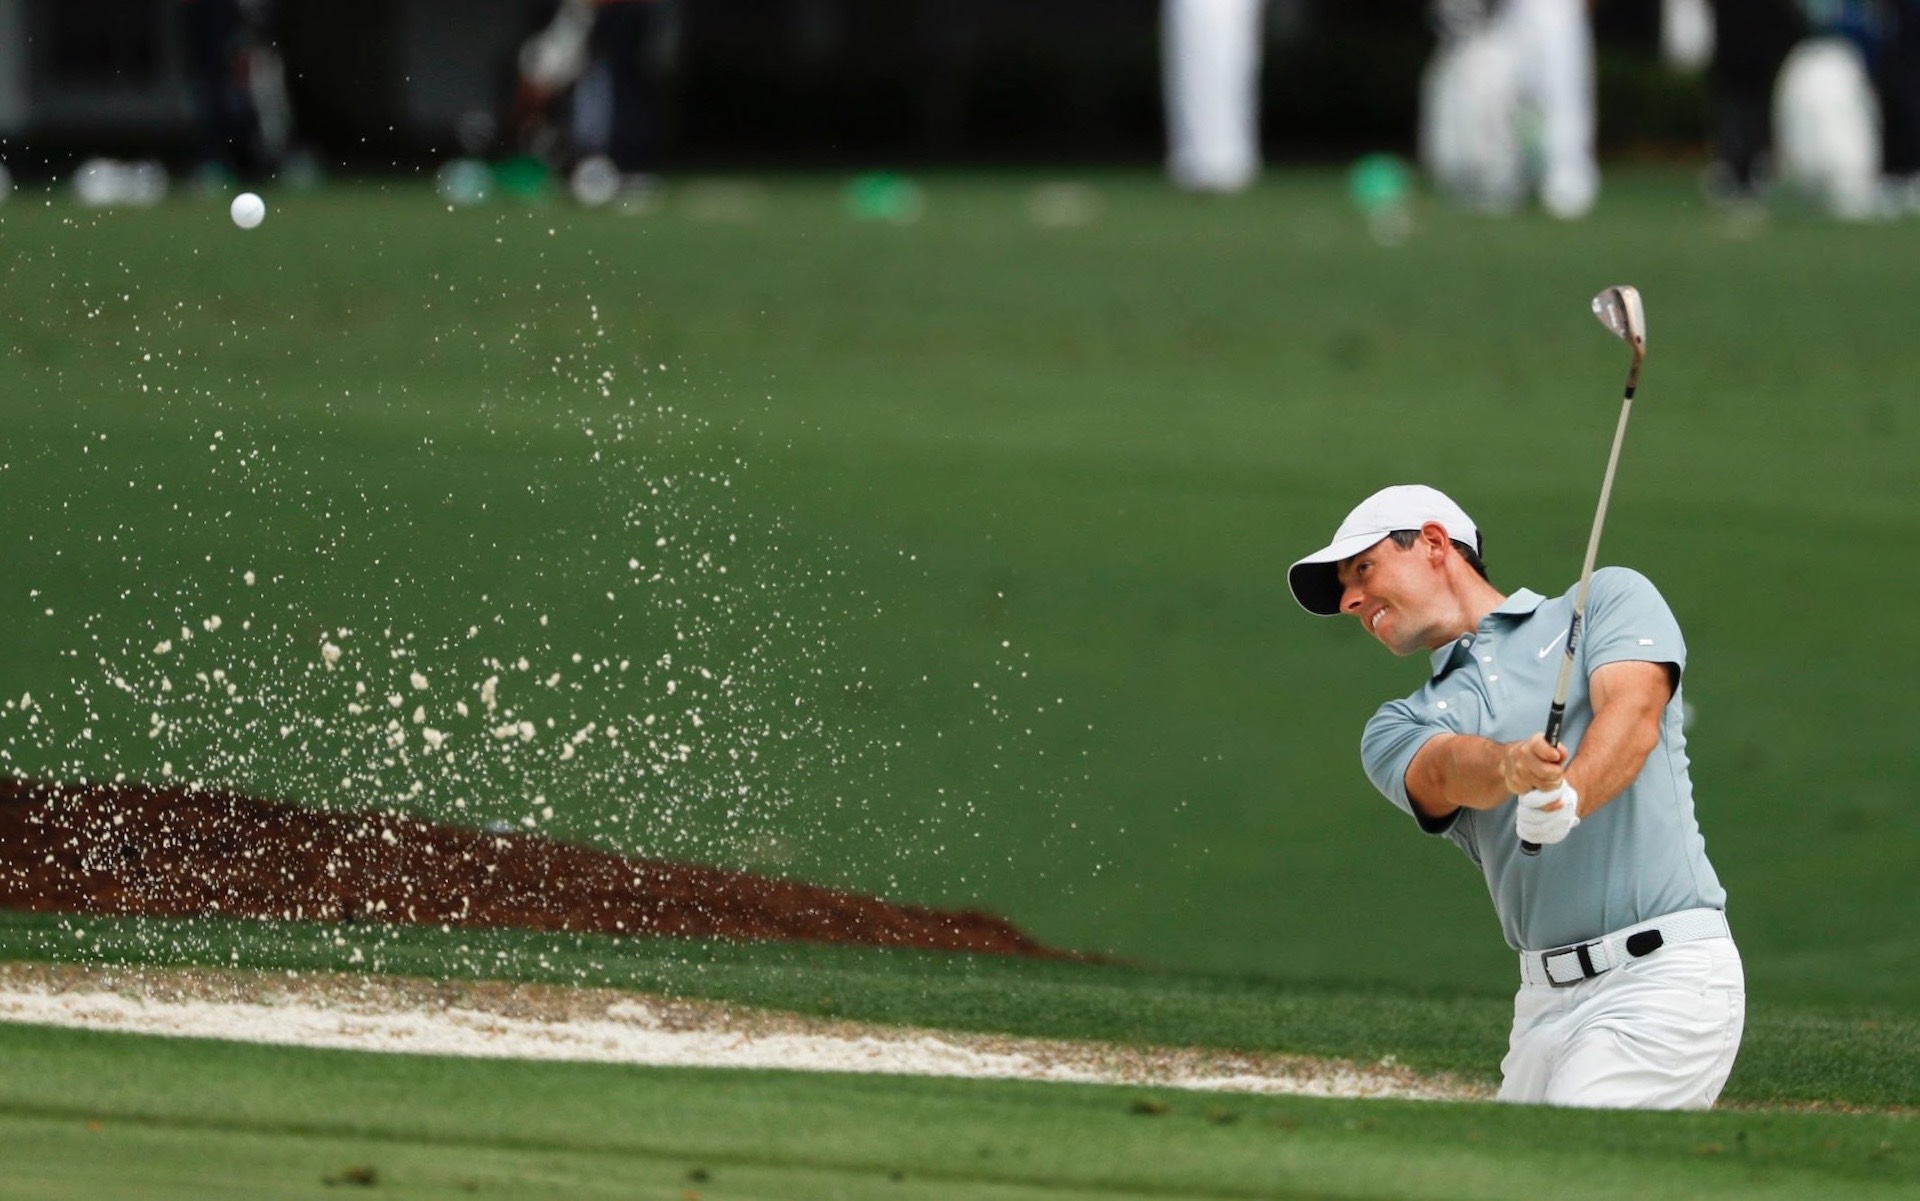 Rory Mcllroy Driven by Meditation and Mindfulness in Pursuit of Masters 2019 Glory (The Telegraph)